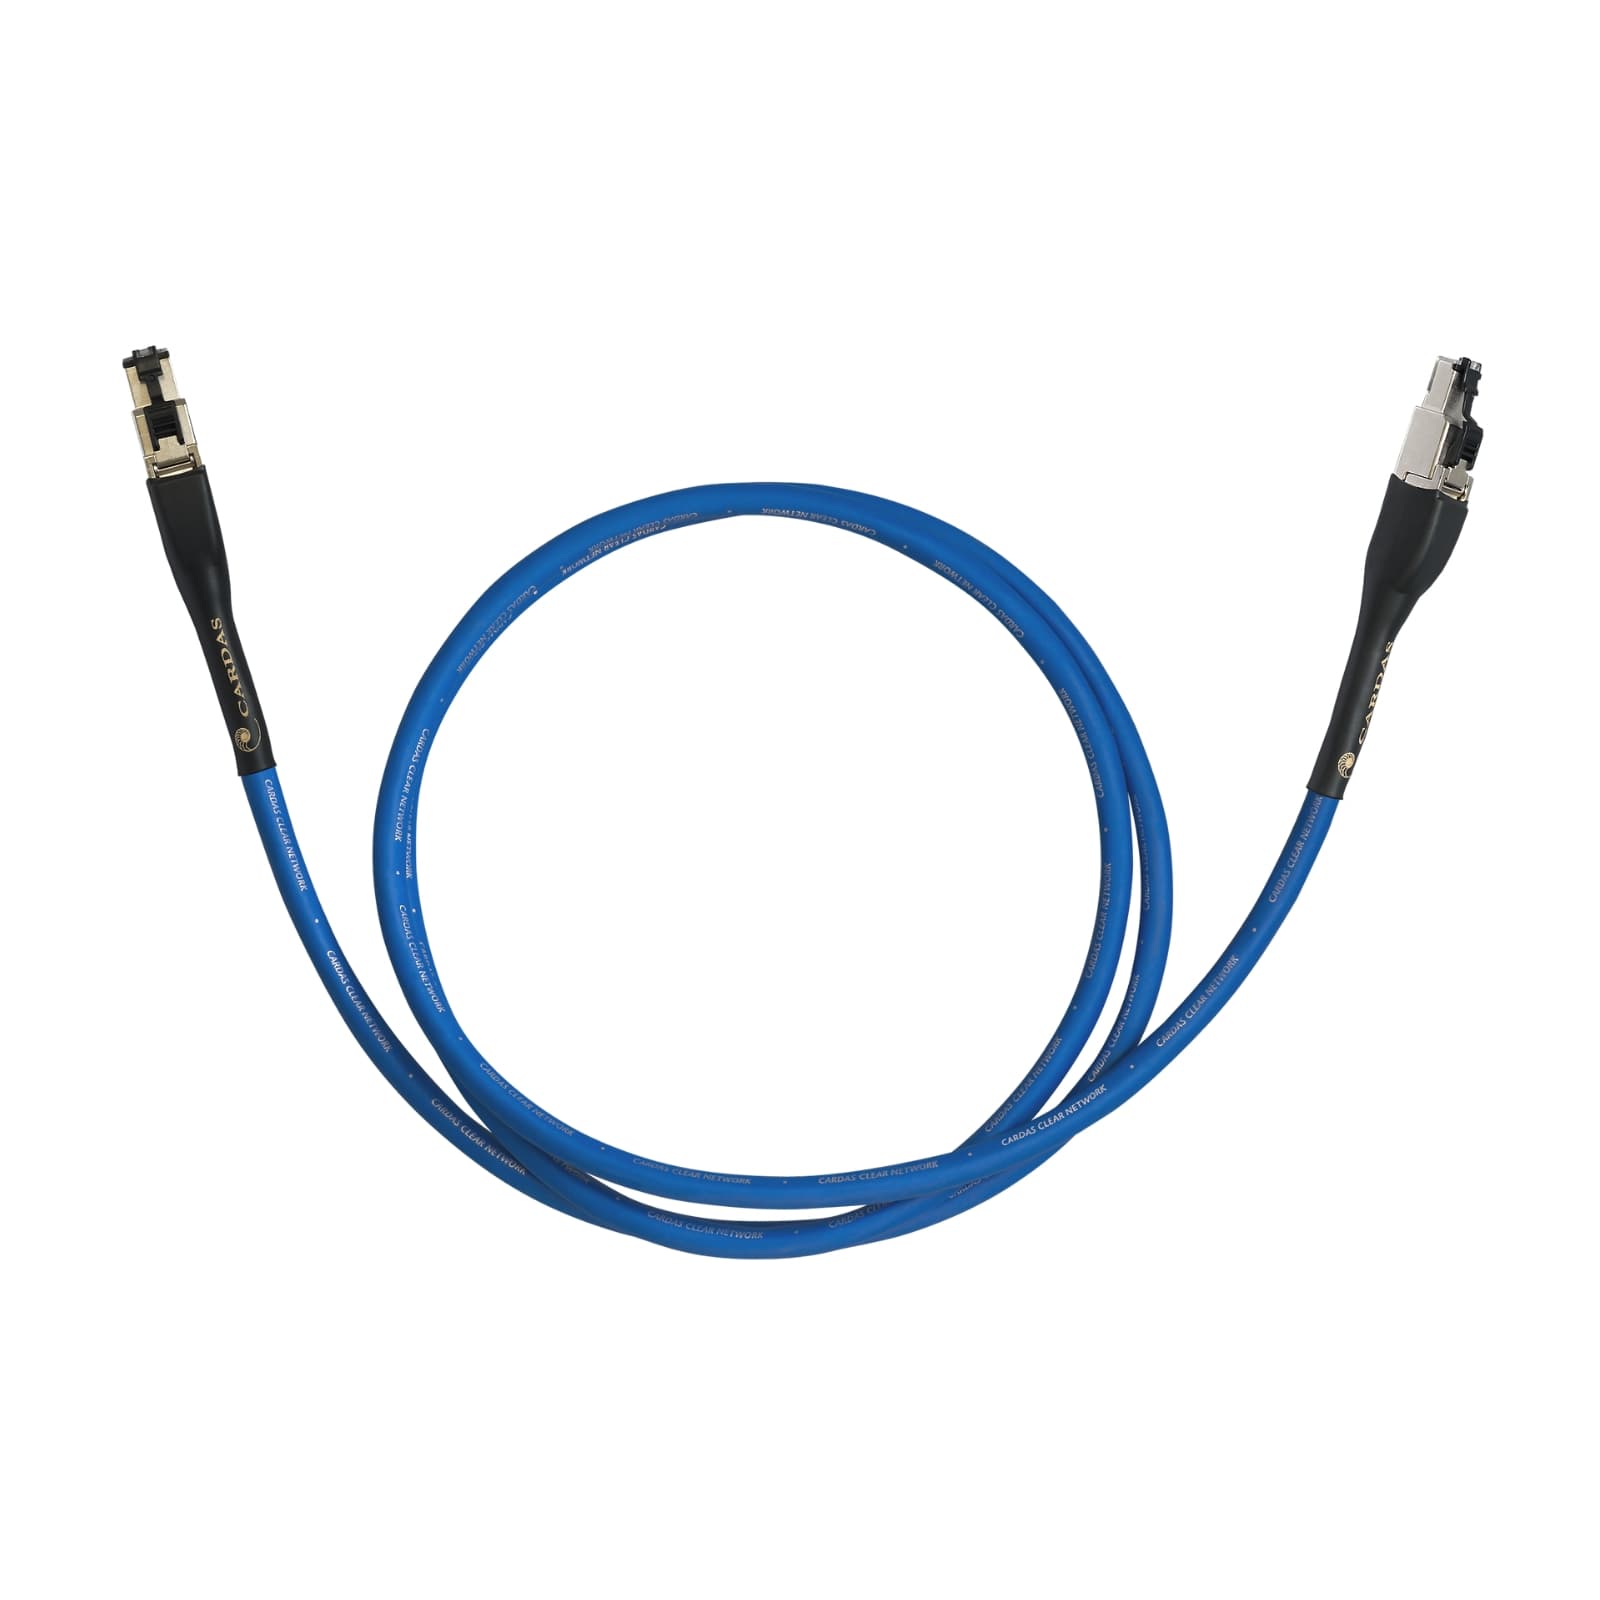 Cardas Clear Network (CAT-7 Ethernet) Cable